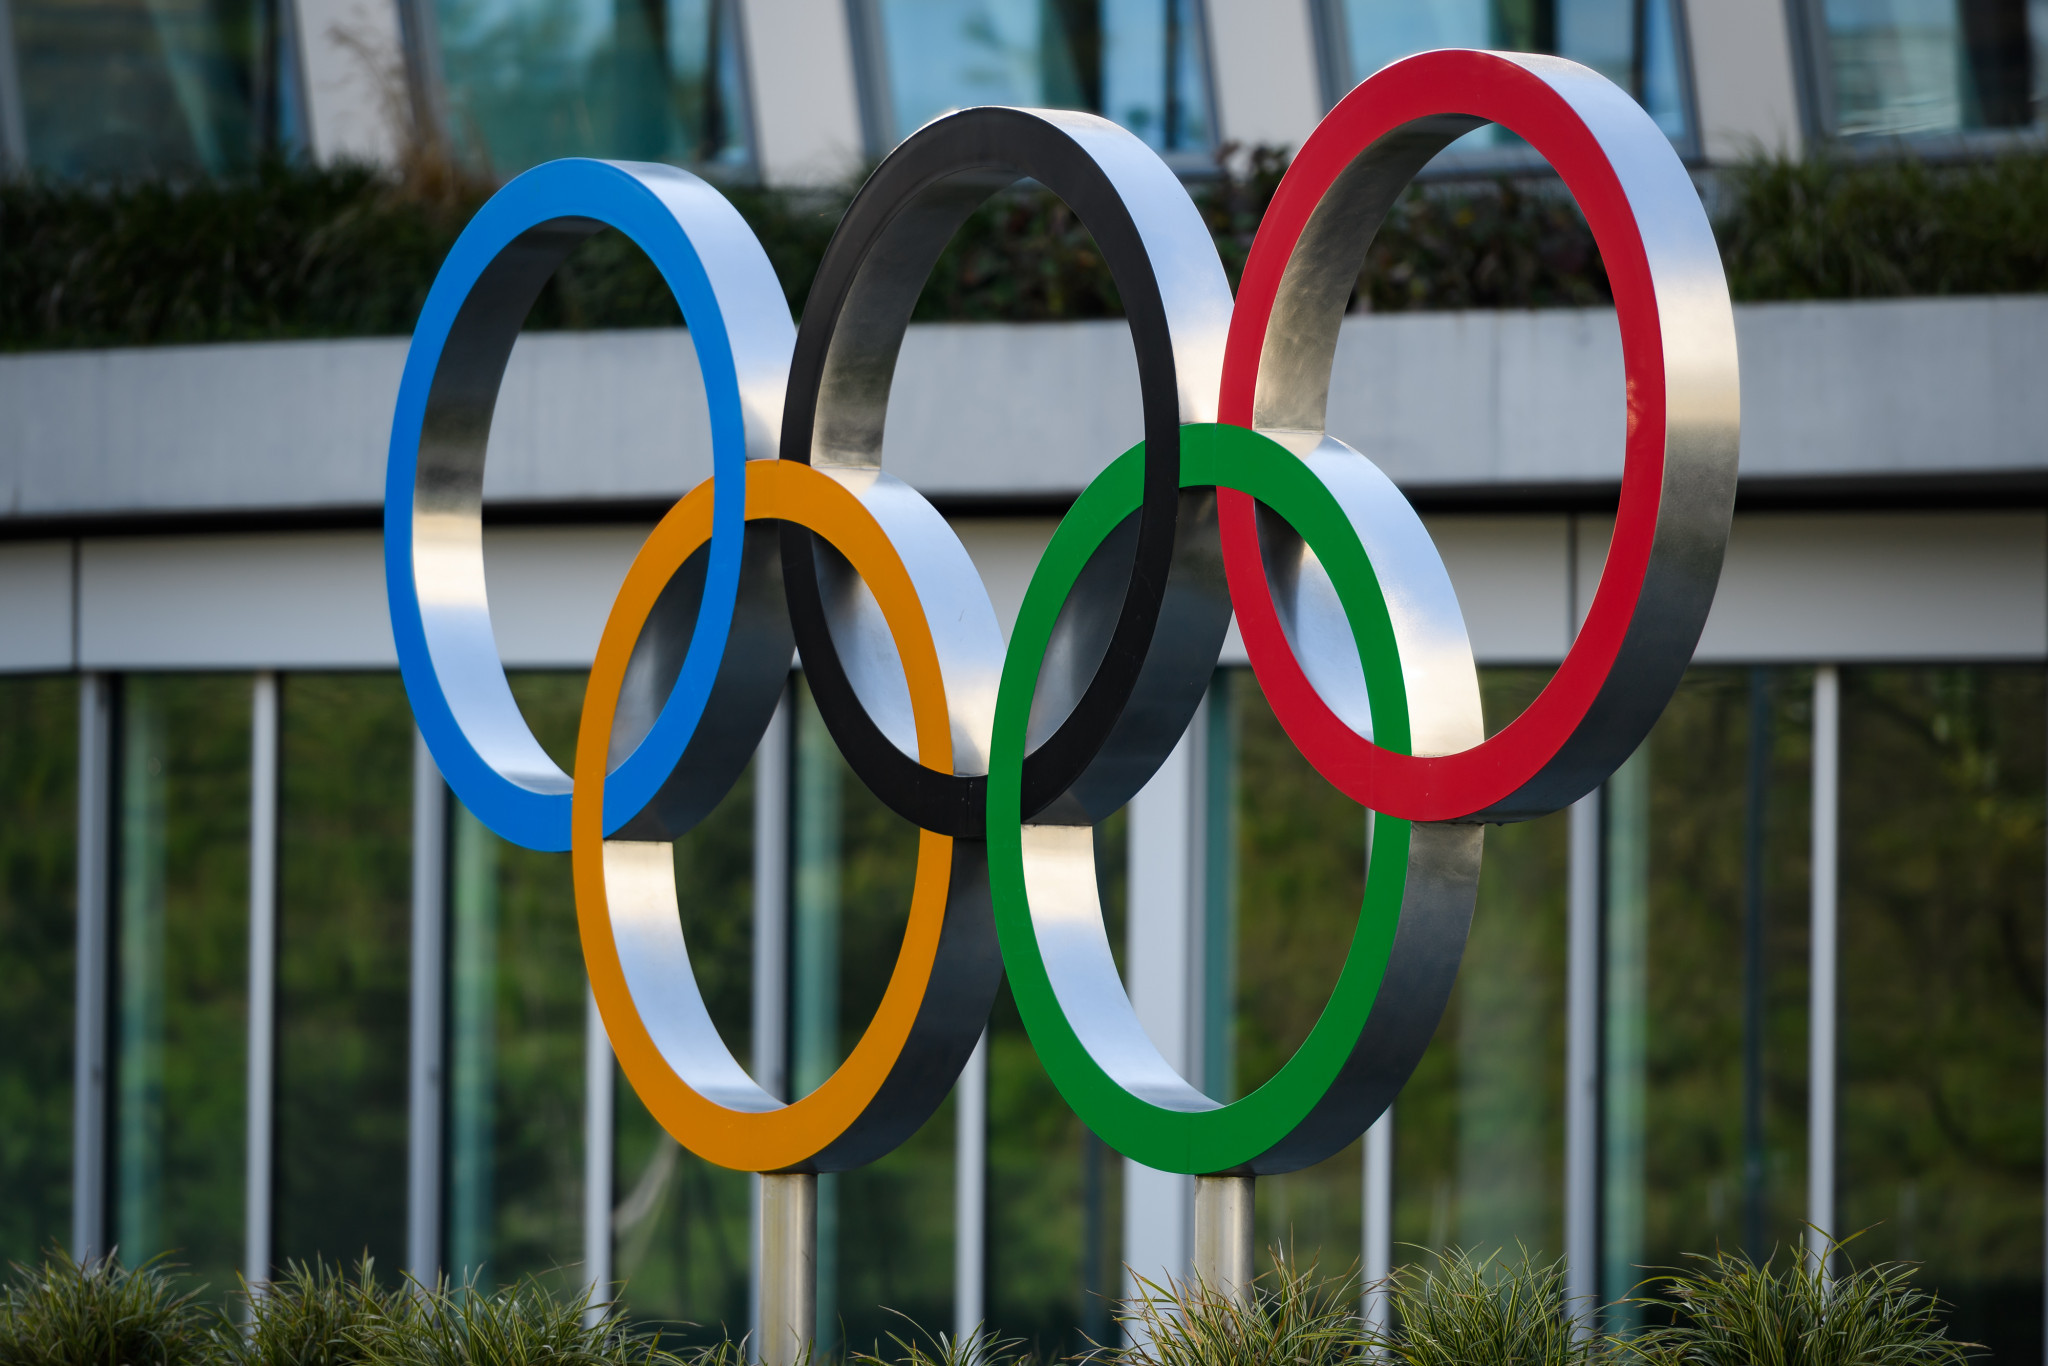 Crocmedia has reached an agreement with Seven West Media to broadcast the Tokyo 2020 Olympics ©Getty Images